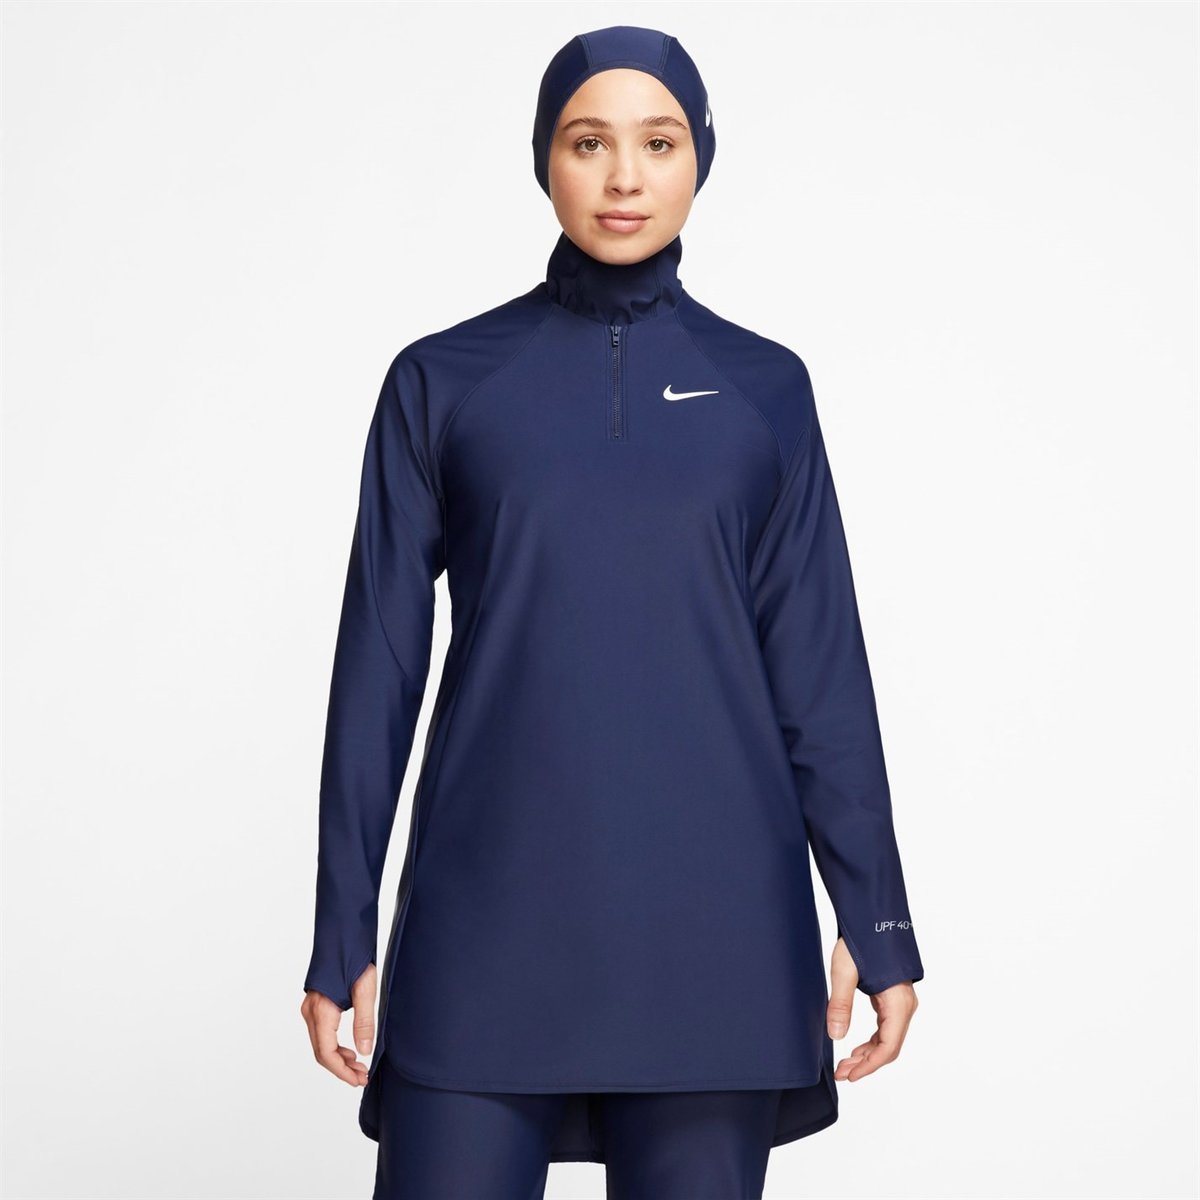 Nike High-Waisted Ribbed Jersey Trousers Womens